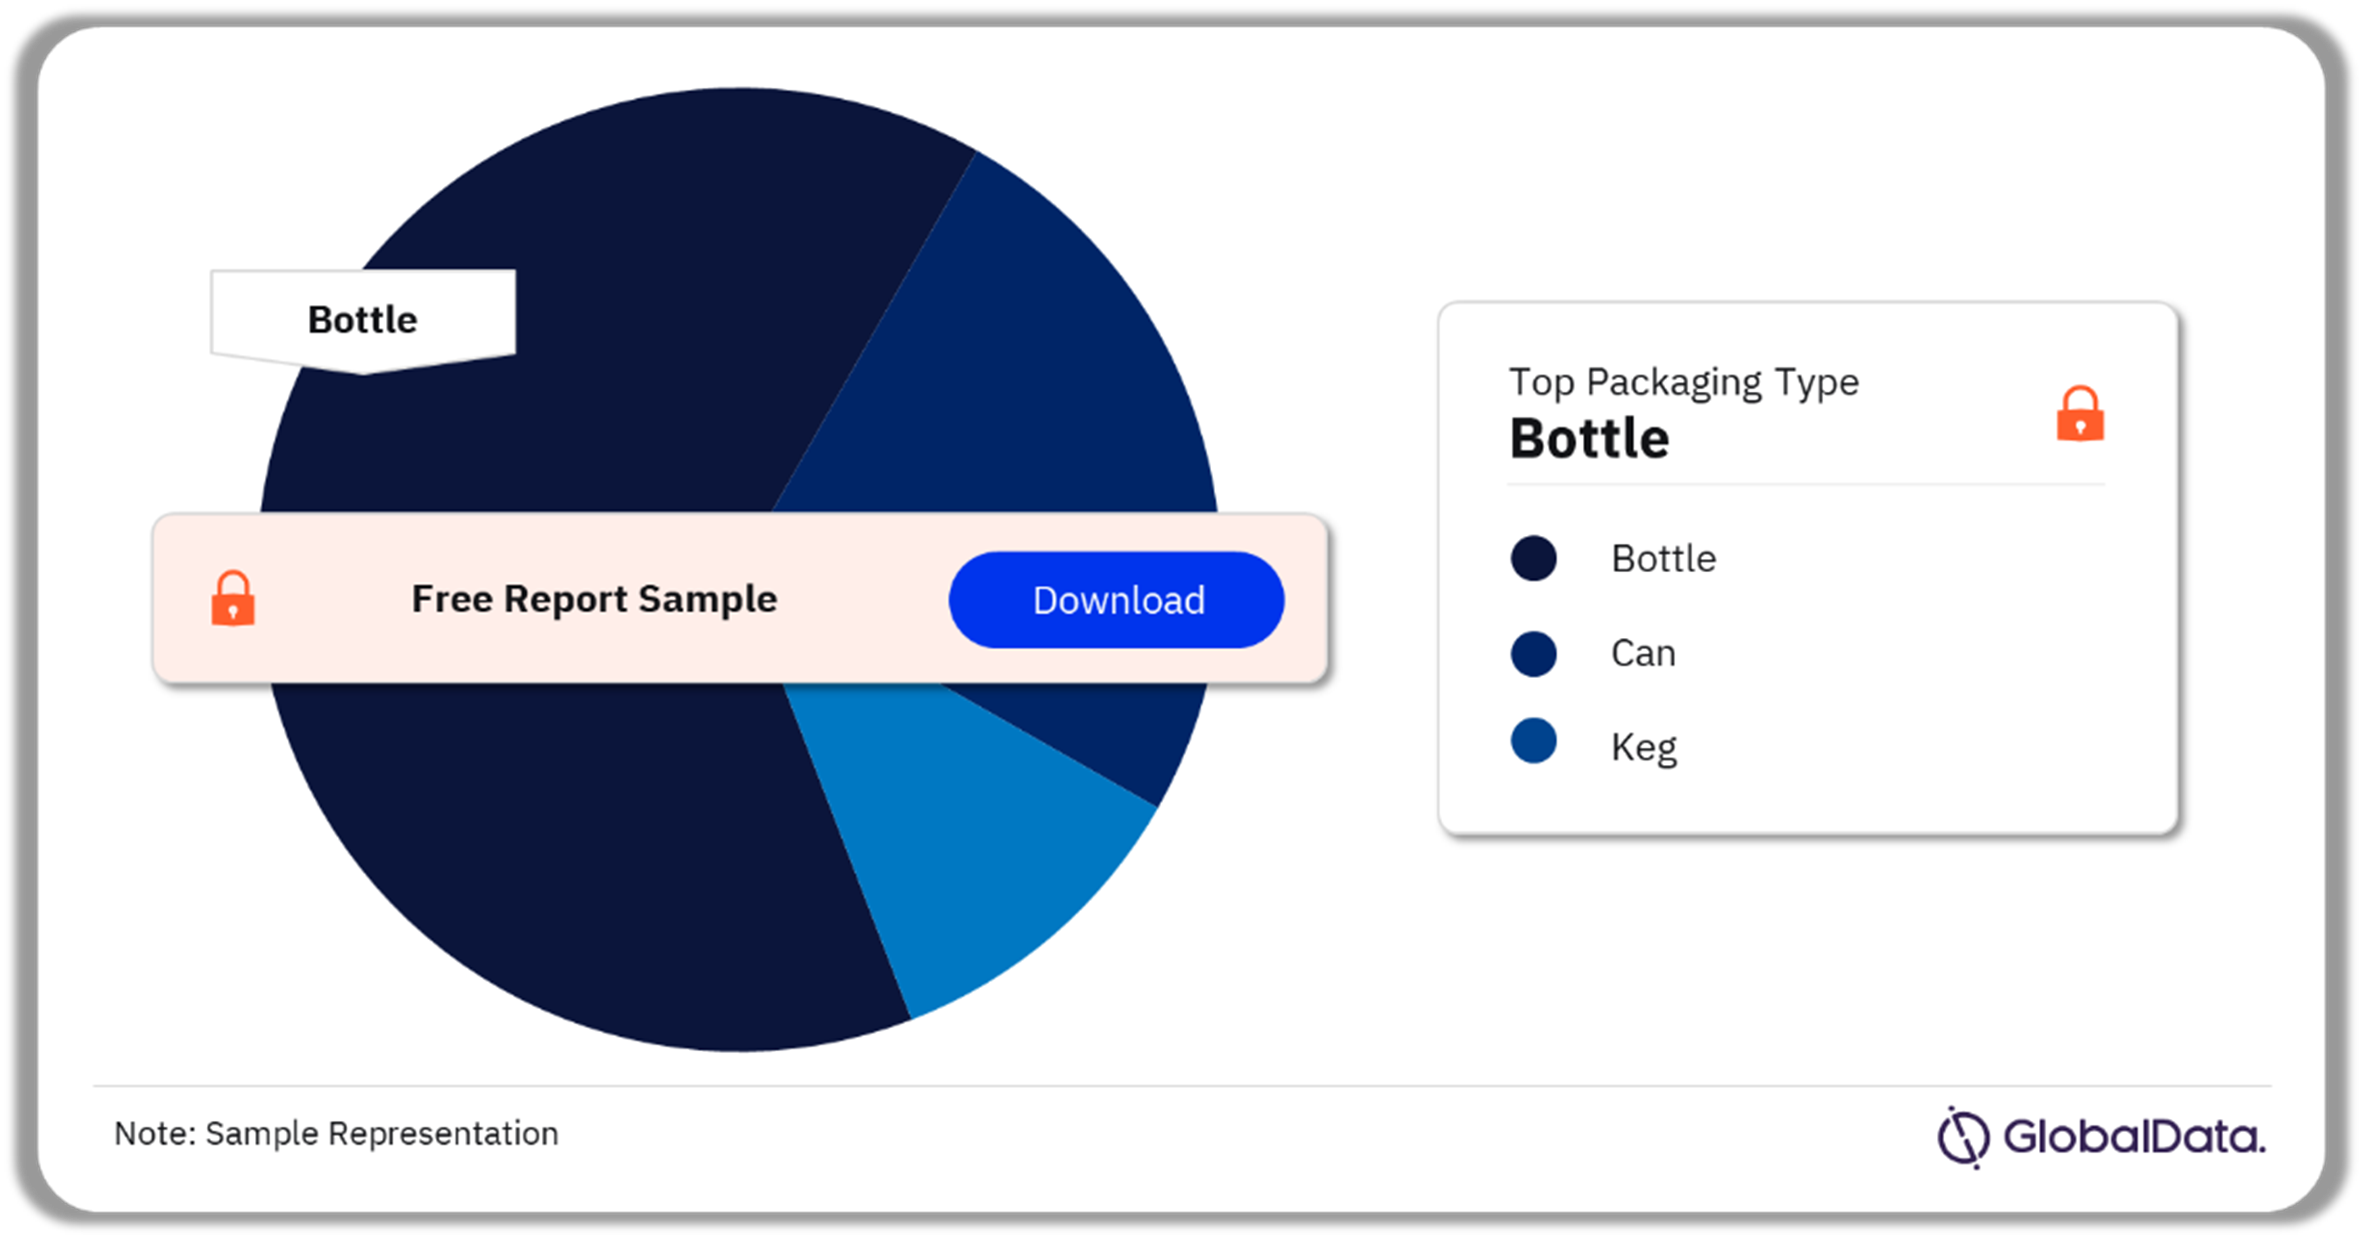 South Korea Beer and Cider Market Analysis by Packaging Types, 2022 (%)